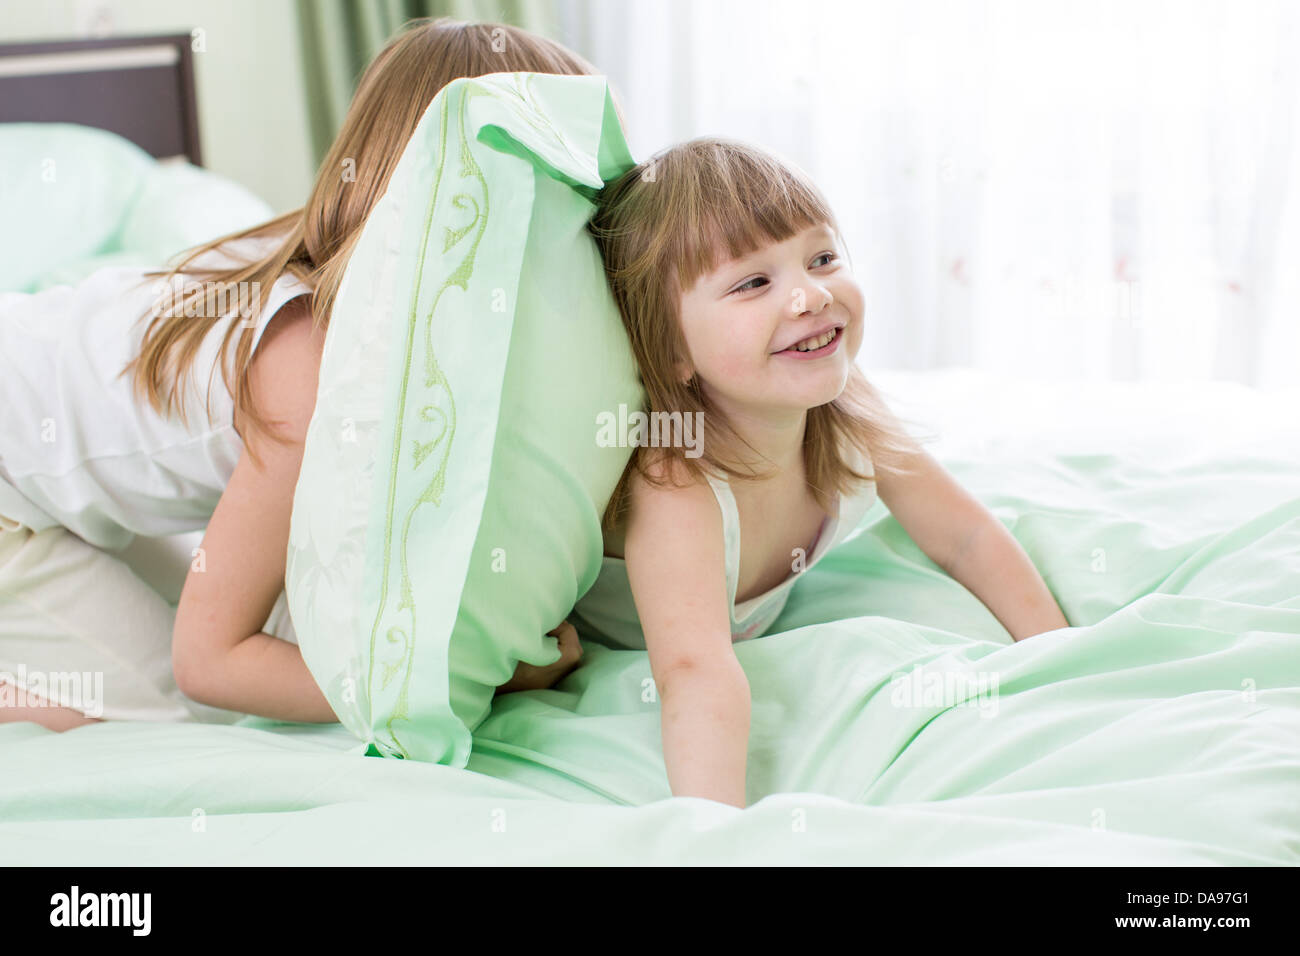 two girls playing in bed Stock Photo